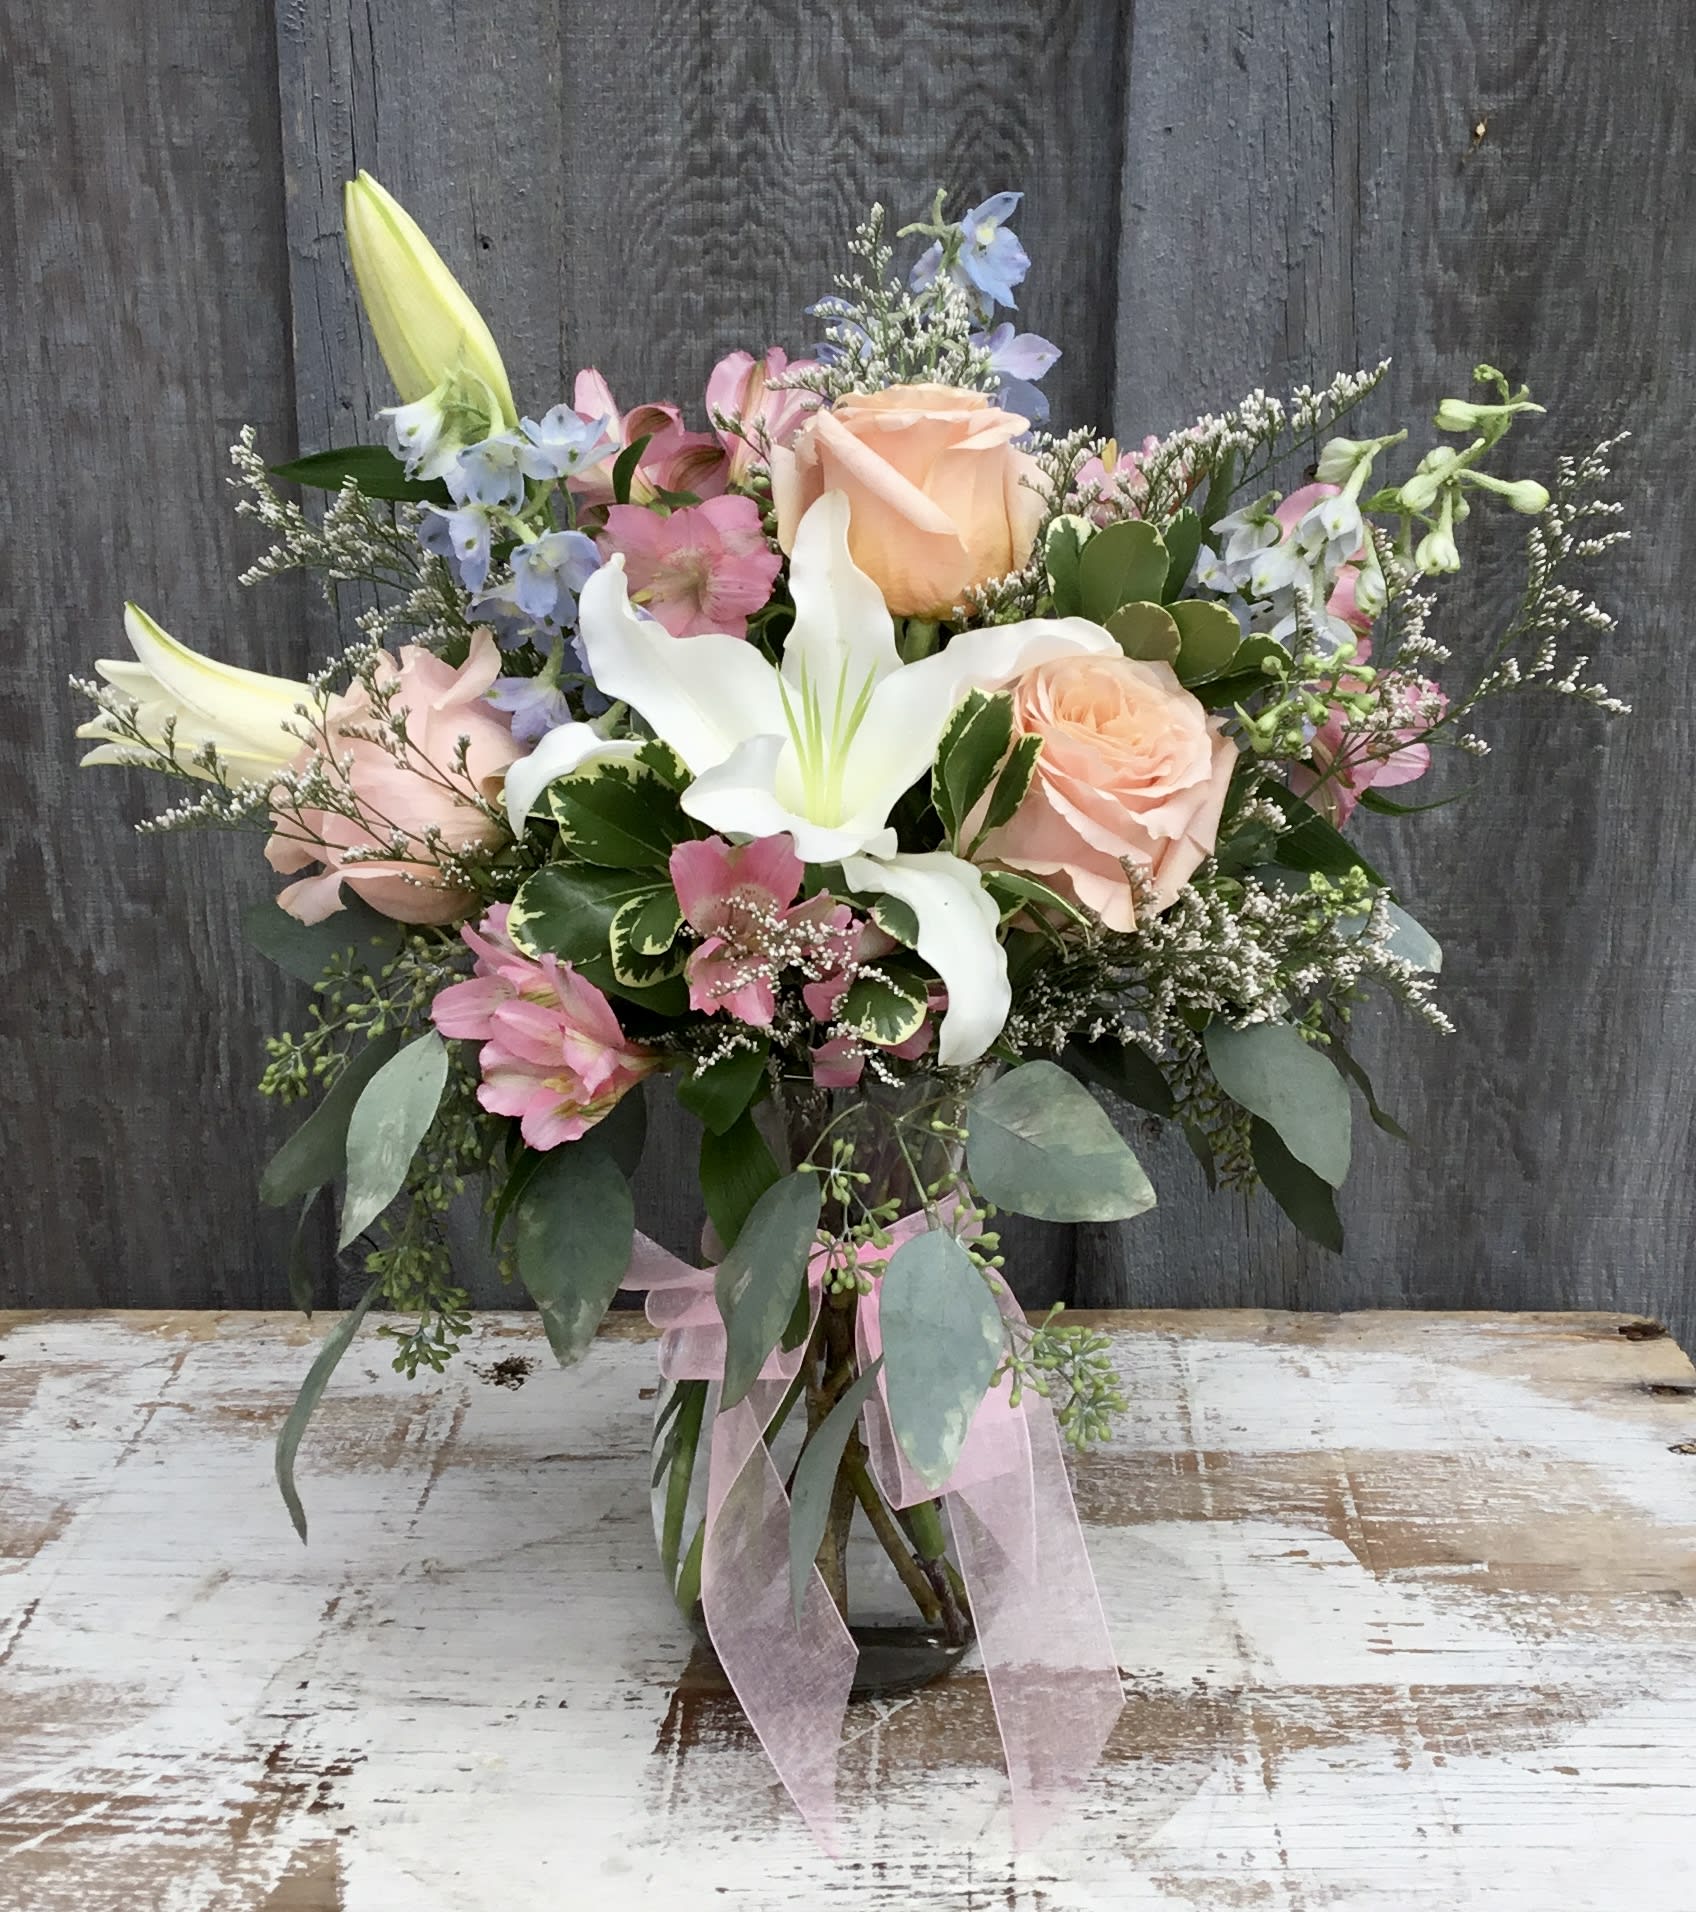 Award Winning Florist in Novi and Northville Michigan Creating Award  Winning Flower Arrangements and Luxury Floral Design for Everyday  Occasions, St. Patricks Day, Easter Flowers, Special Events, Sympathy,  Weddings and More. We